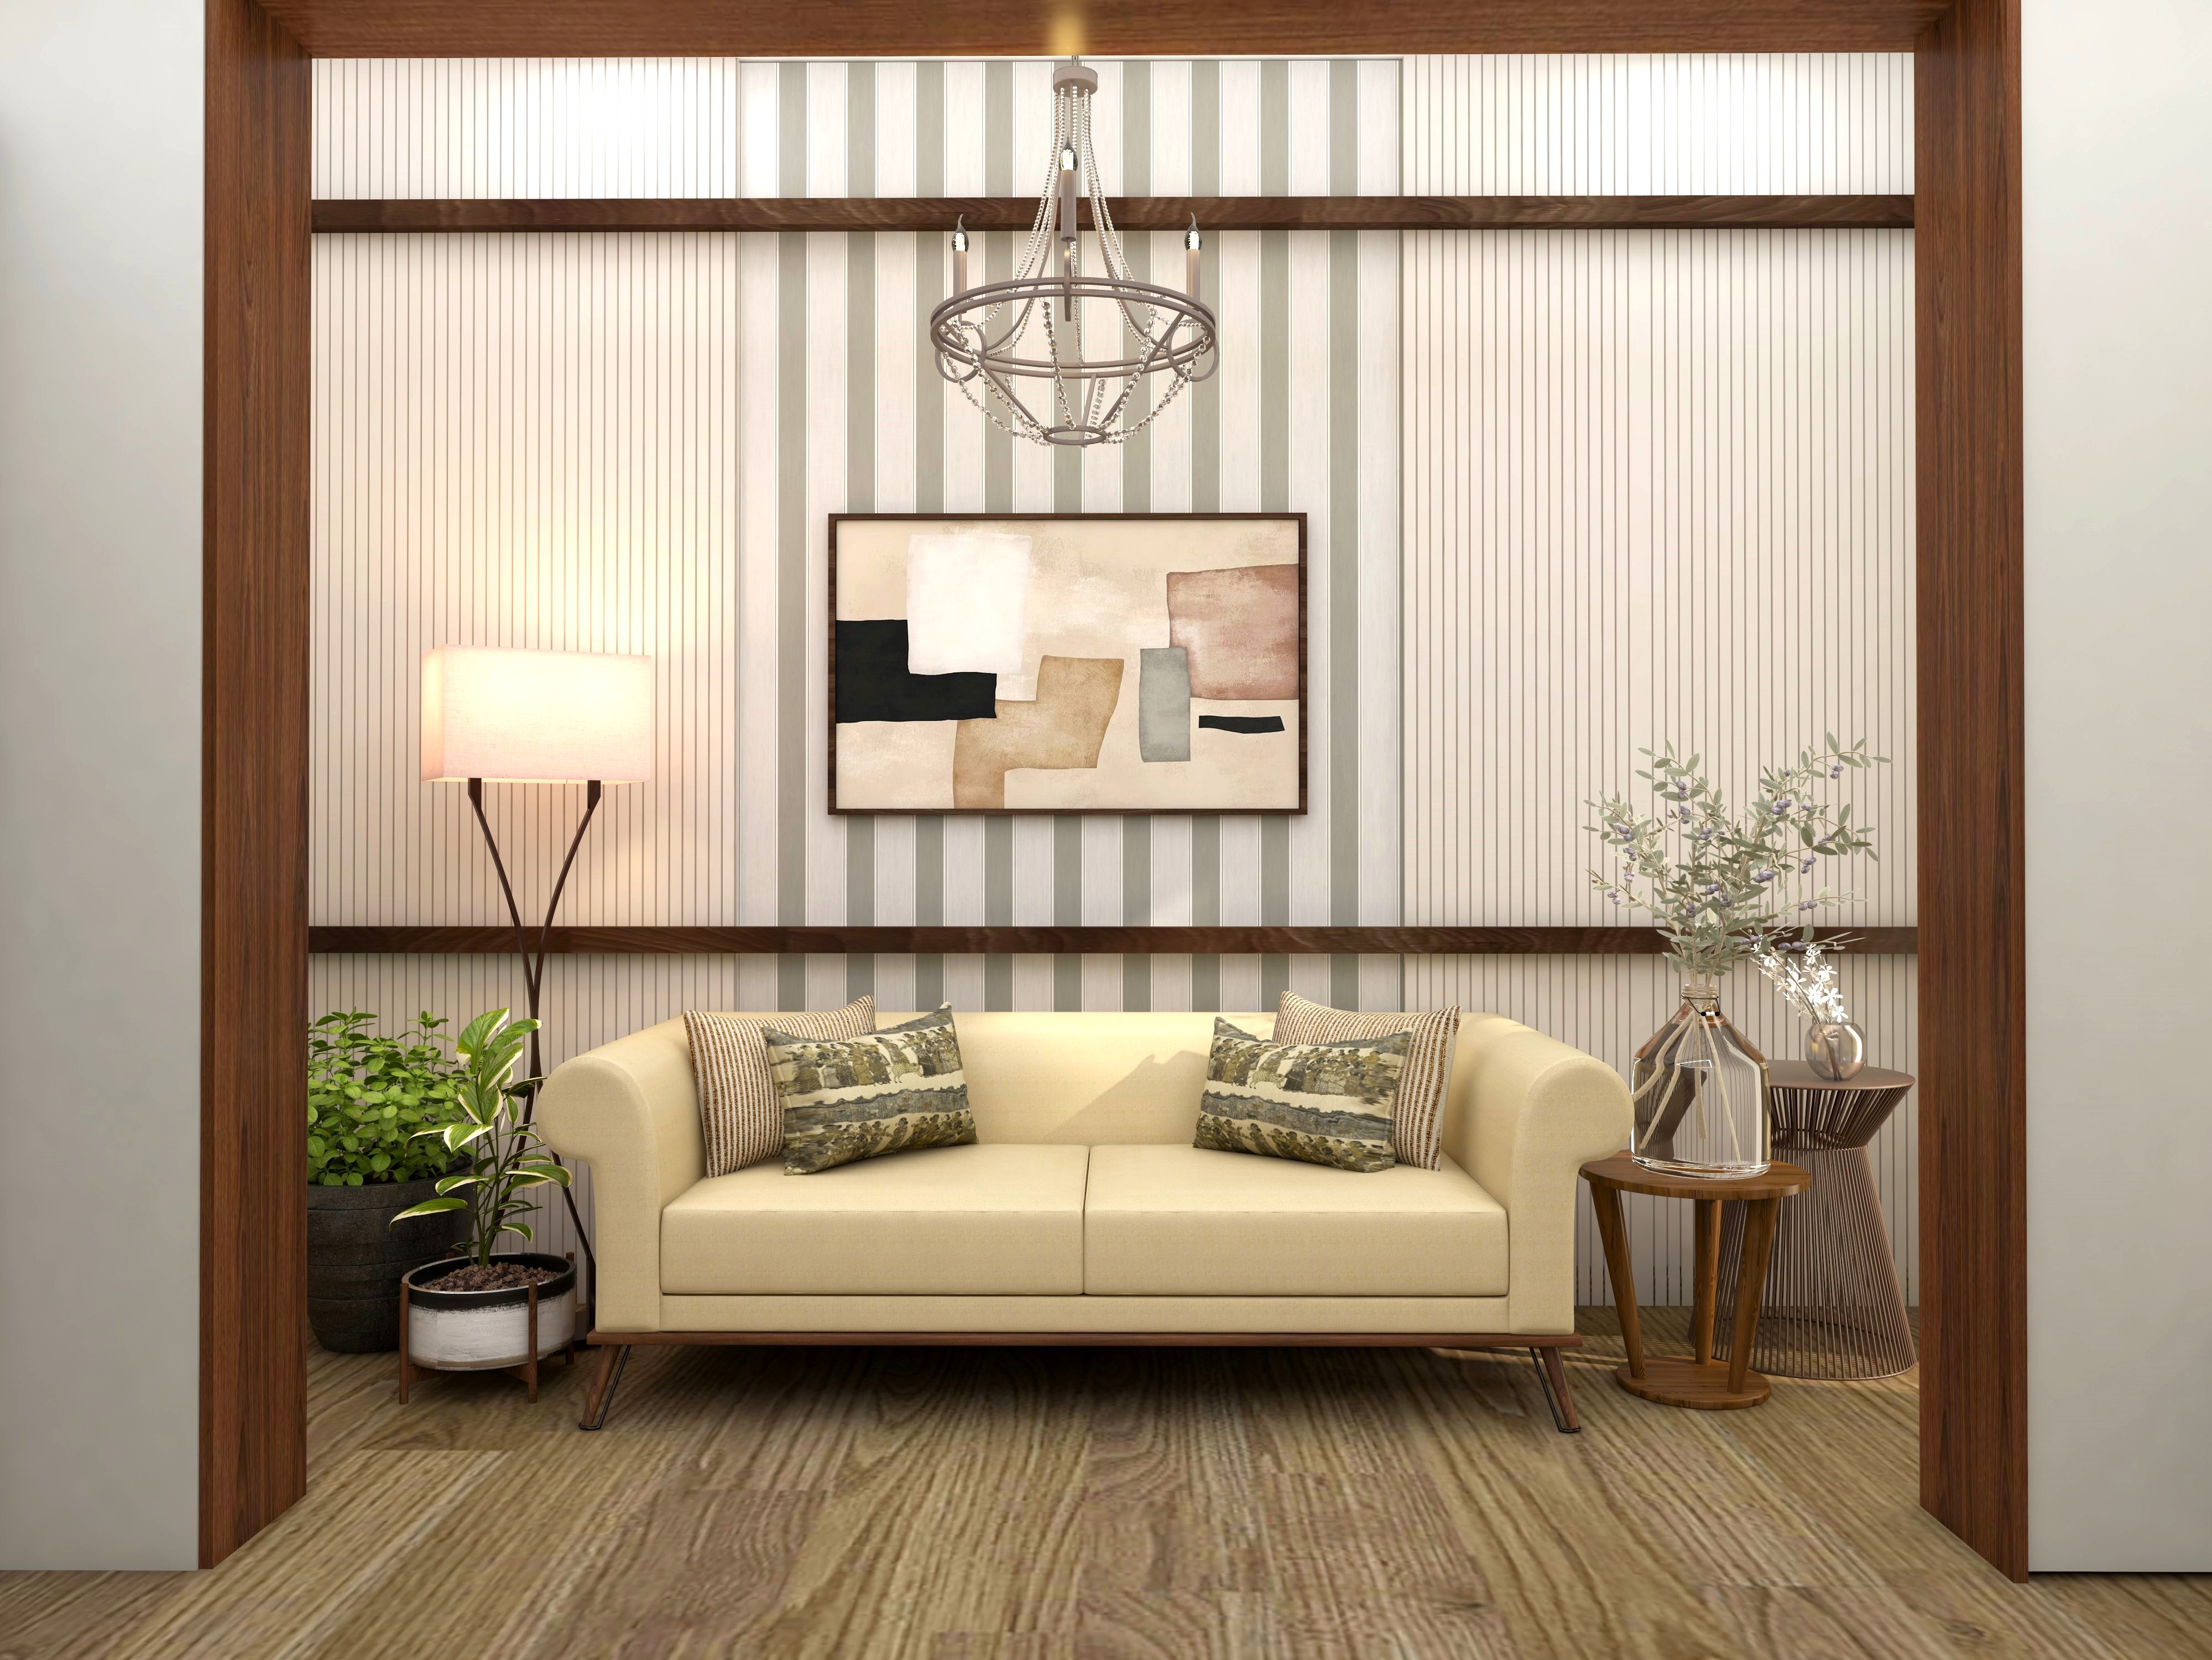 Foyer design with louvered wall paneling and cream sofa-Beautiful Homes